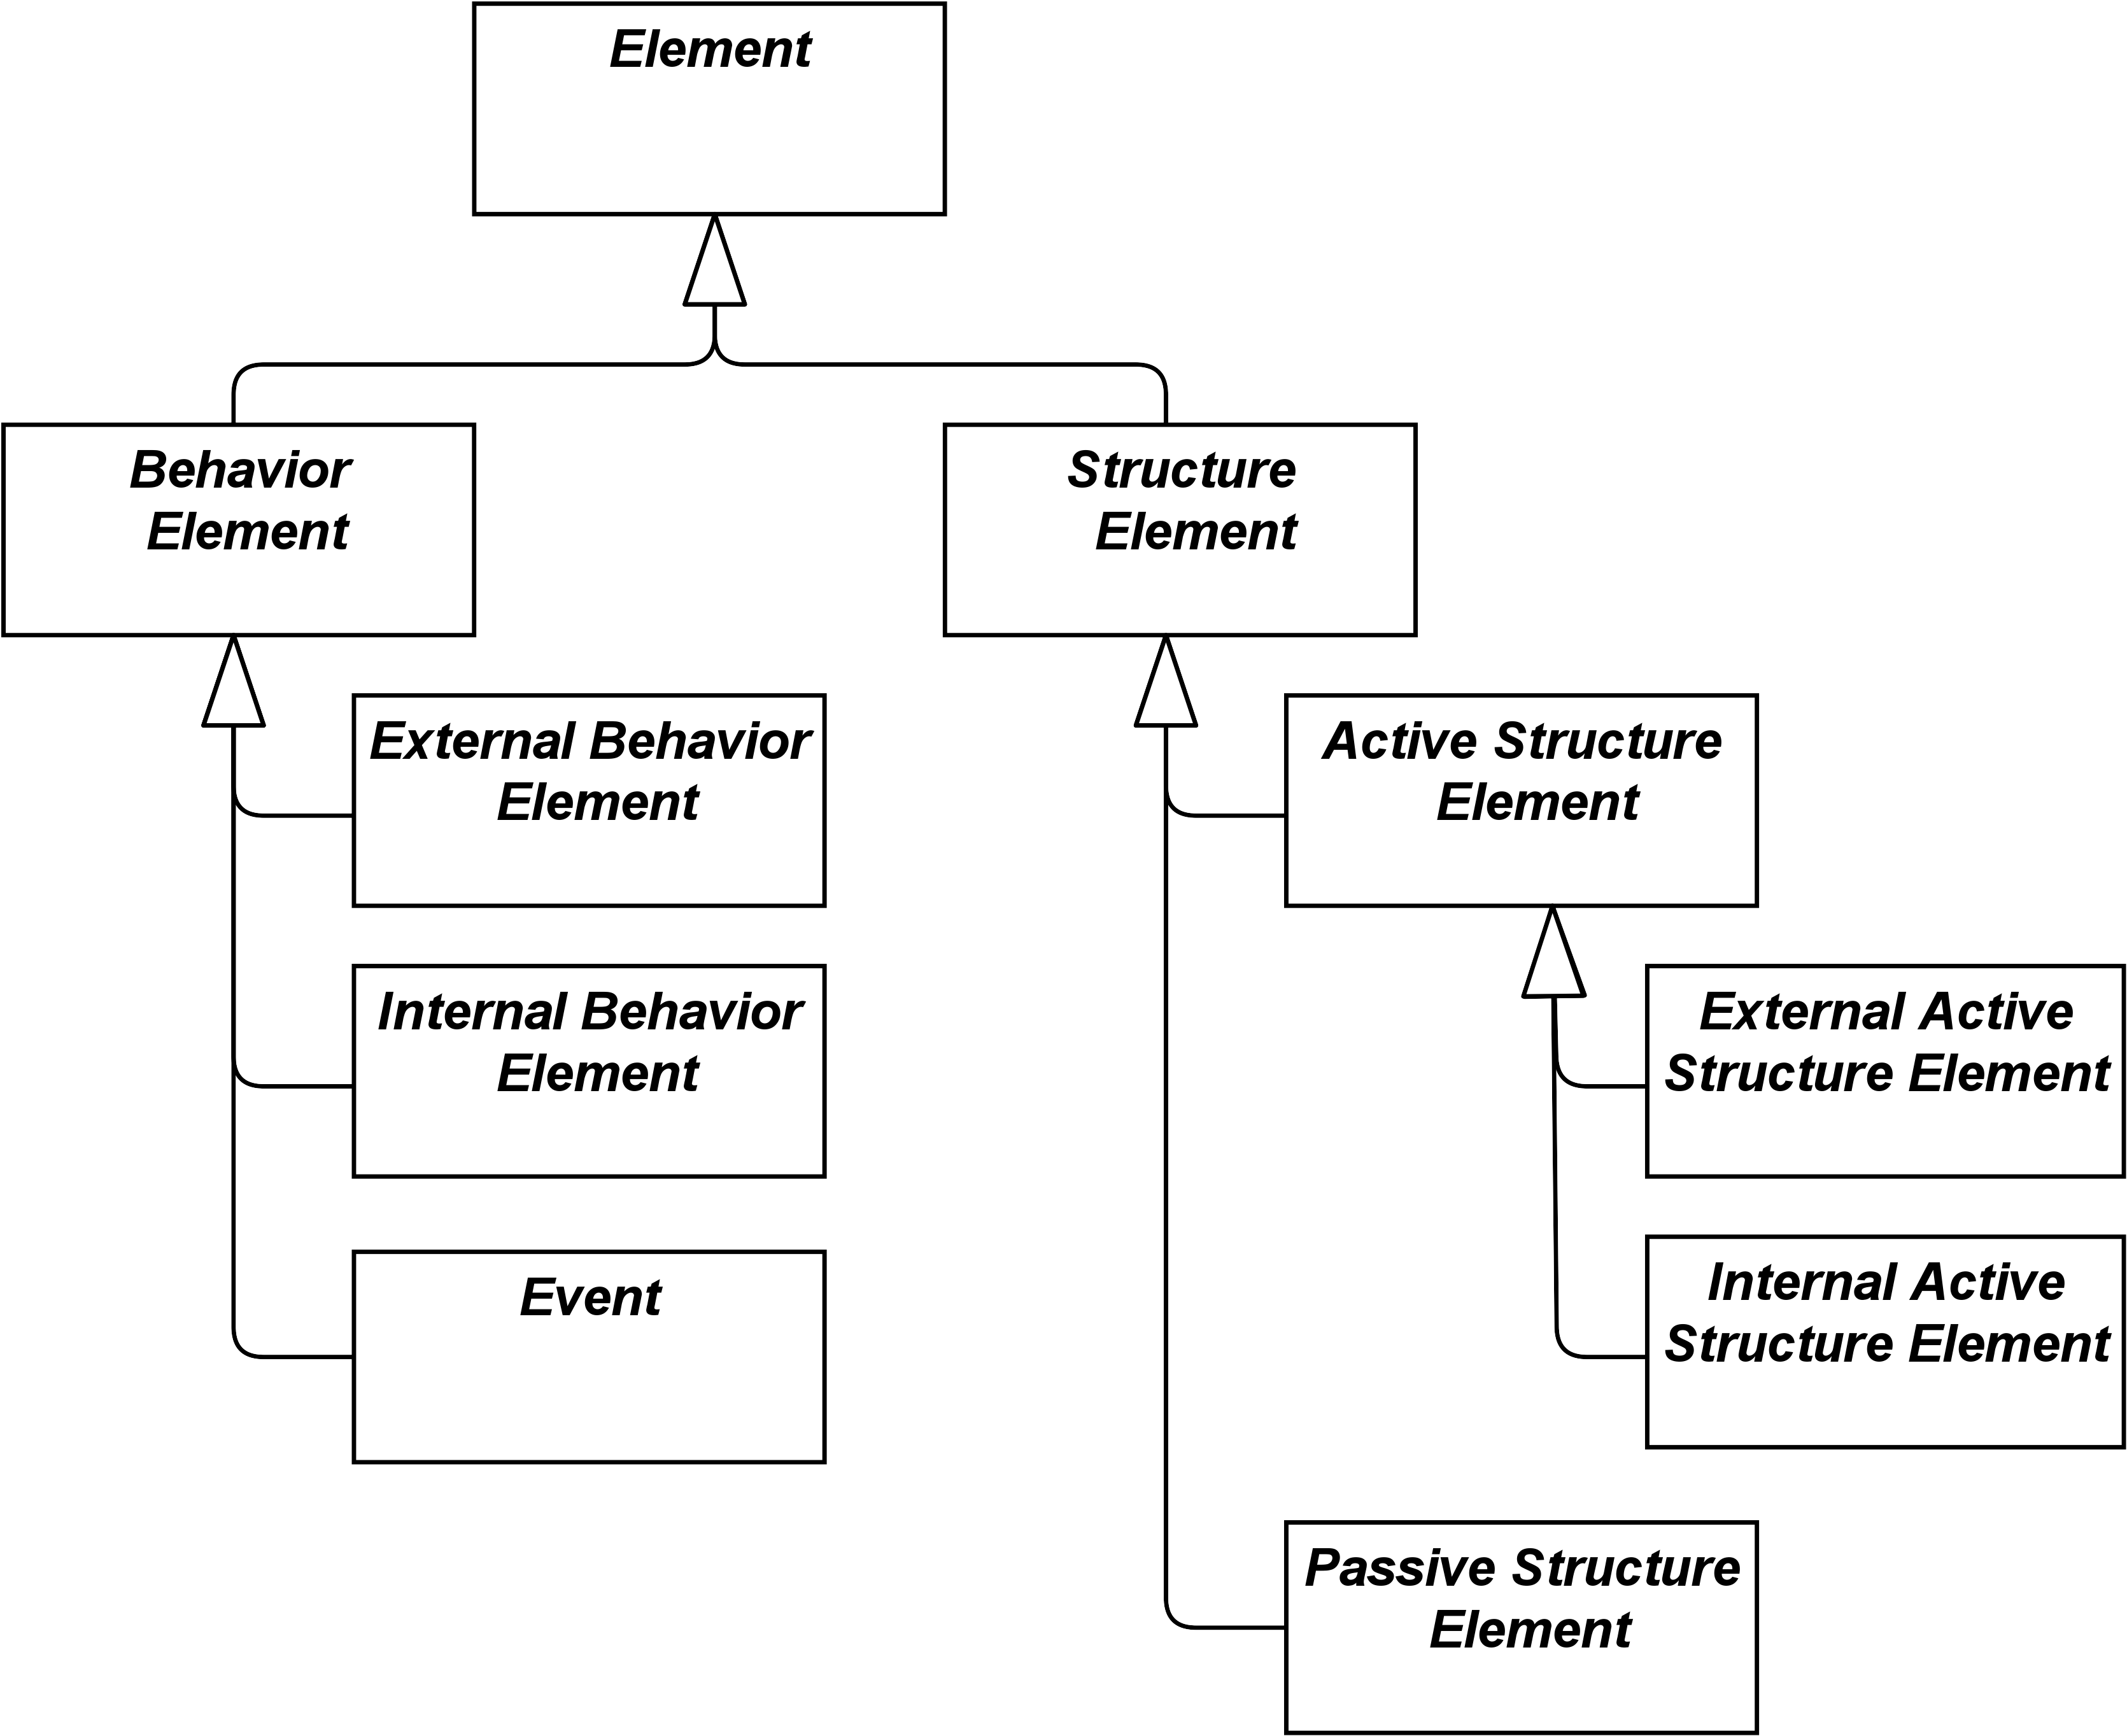 fig Hierarchy of Behavior and Structure Elements